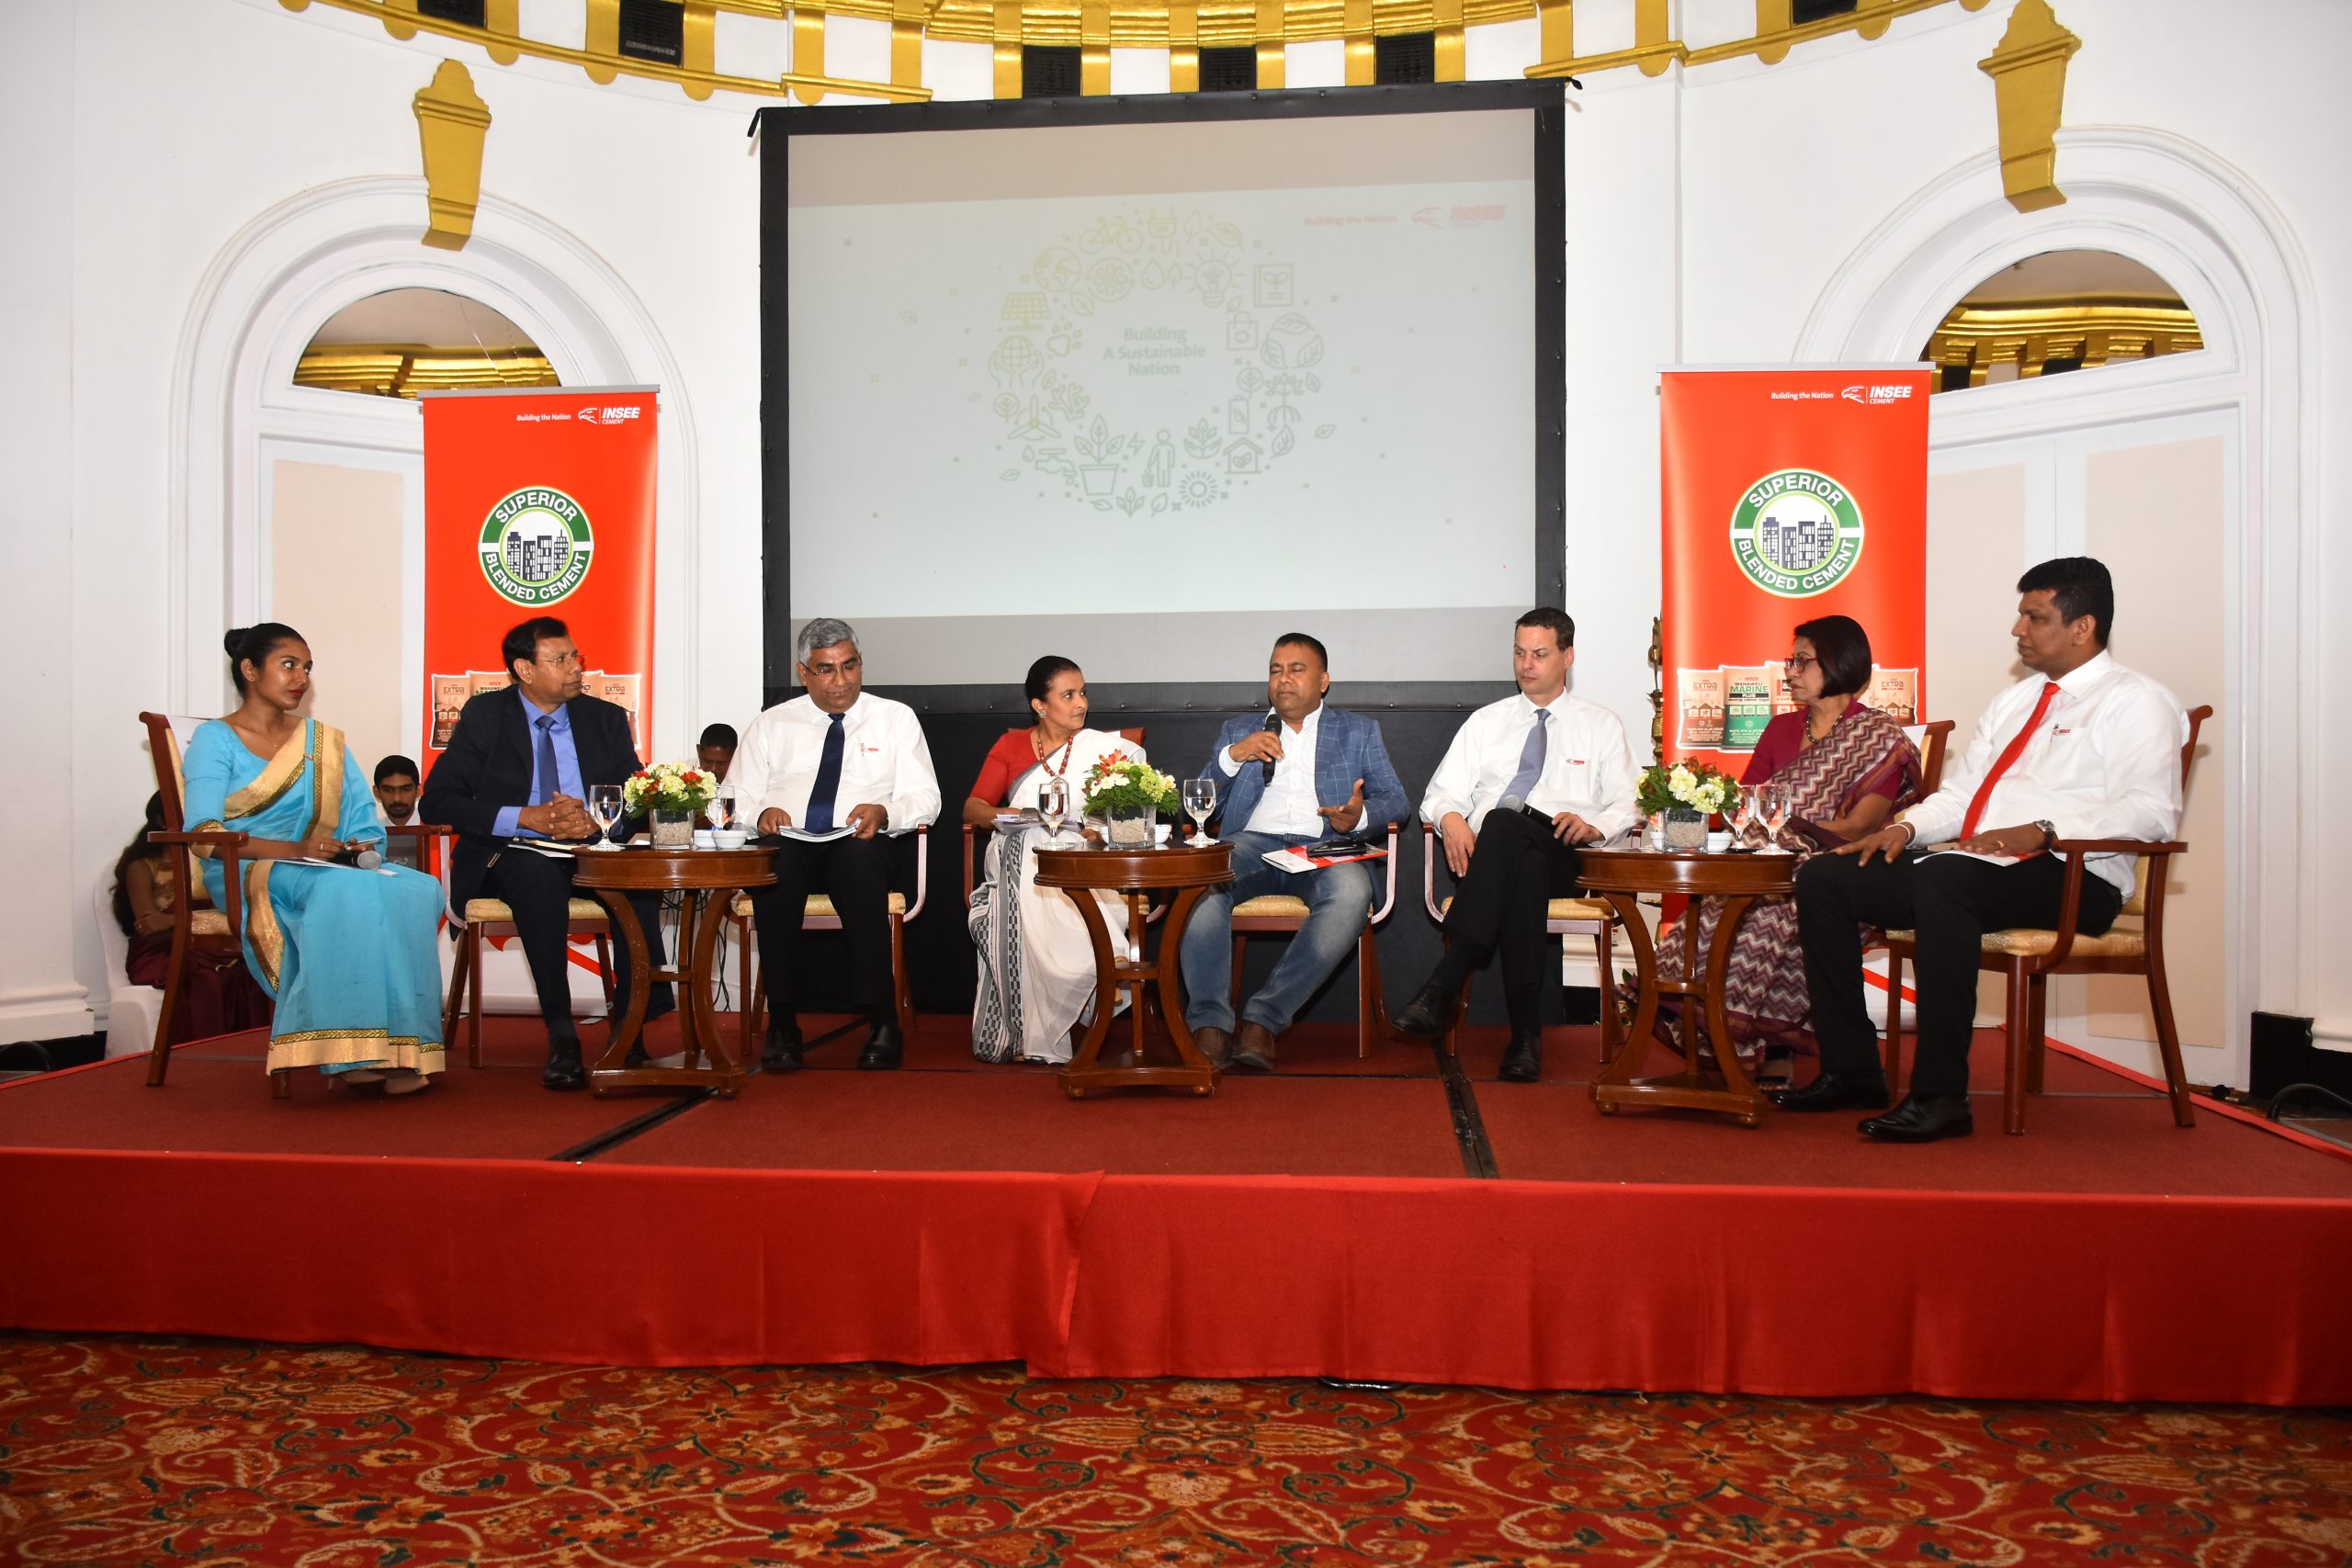 INSEE Cement Sri Lanka Launches Inaugural Sustainability Report 2018 focusing on  “Building a Sustainable Nation”